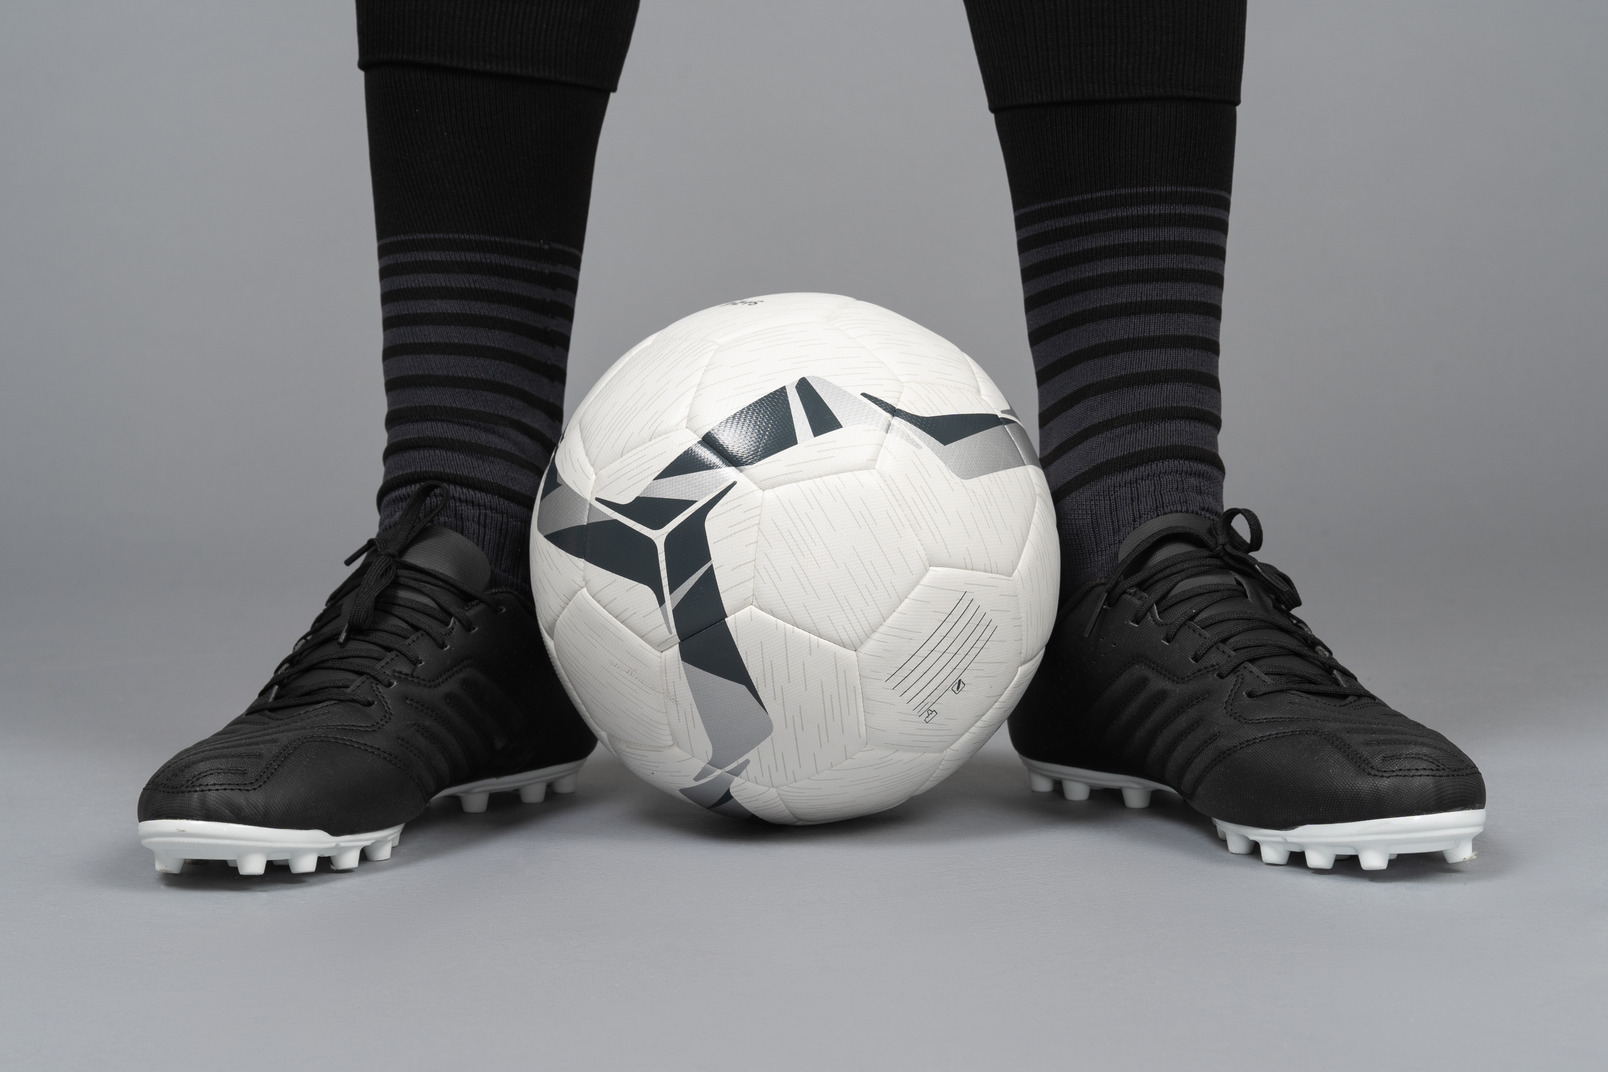 Close-up of a soccer player's legs holding a ball